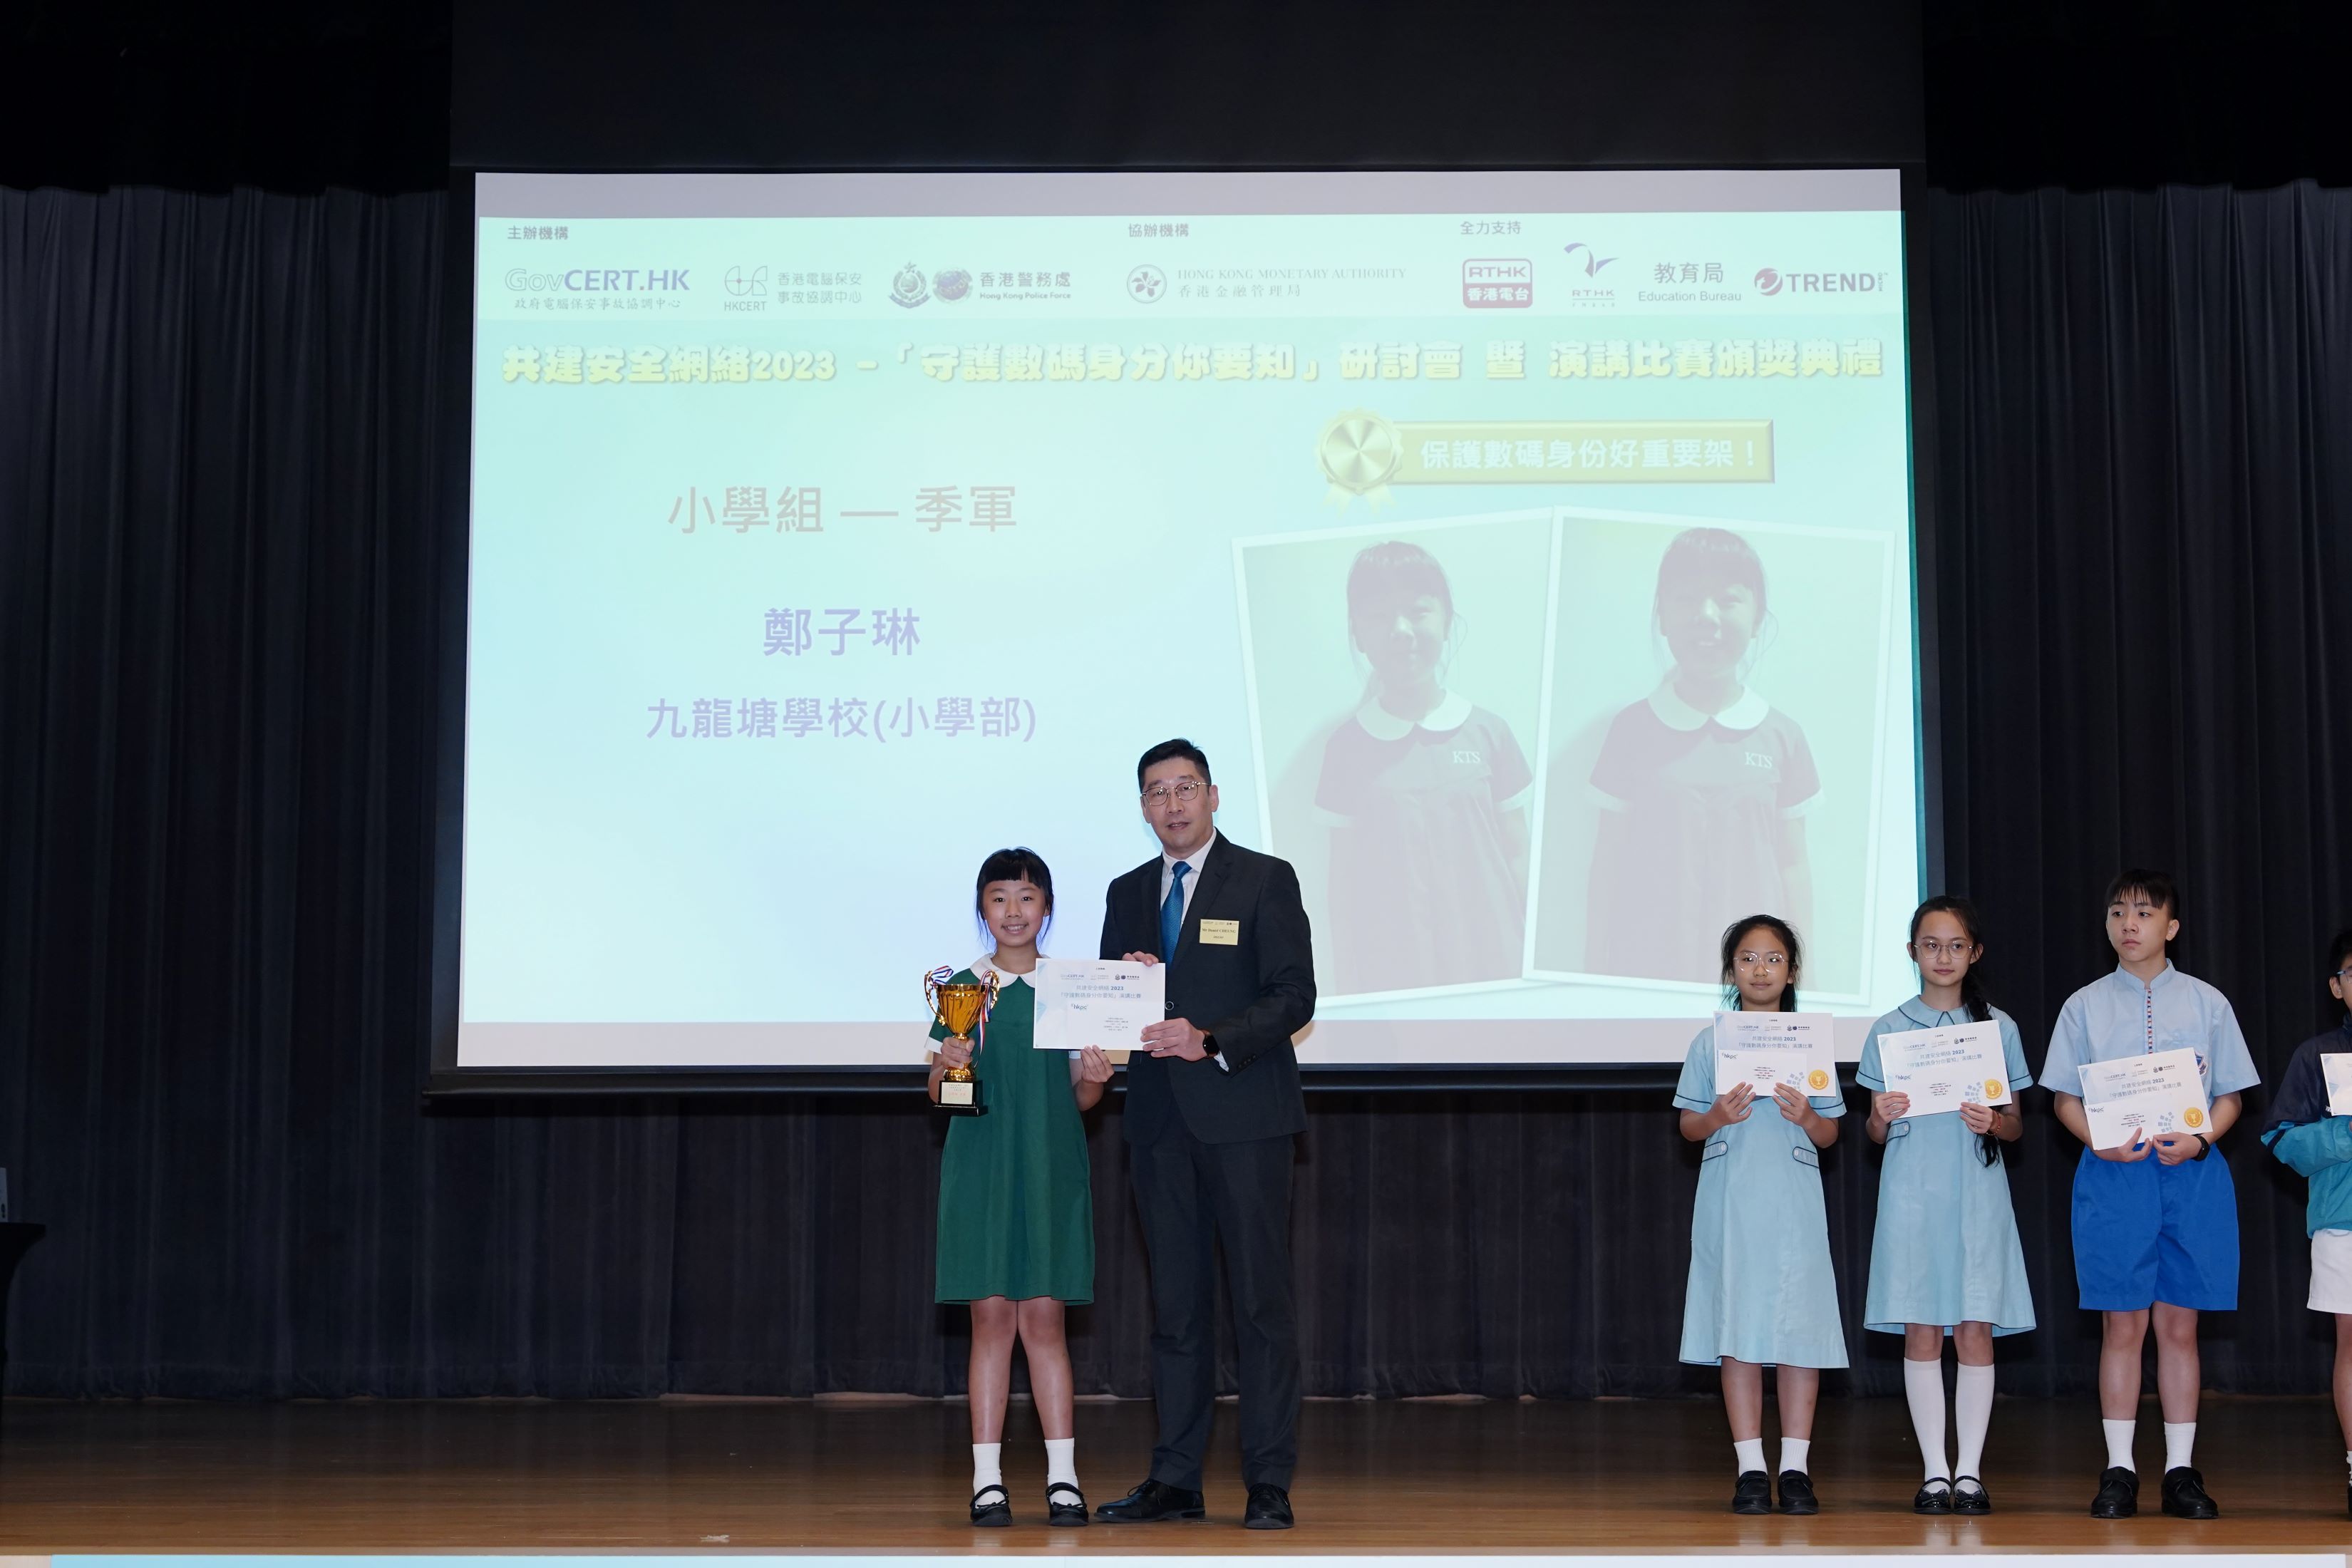 2nd Runner-up of Primary School Category - Cheng Tsz Lam (Kowloon Tong School (Primary Section))